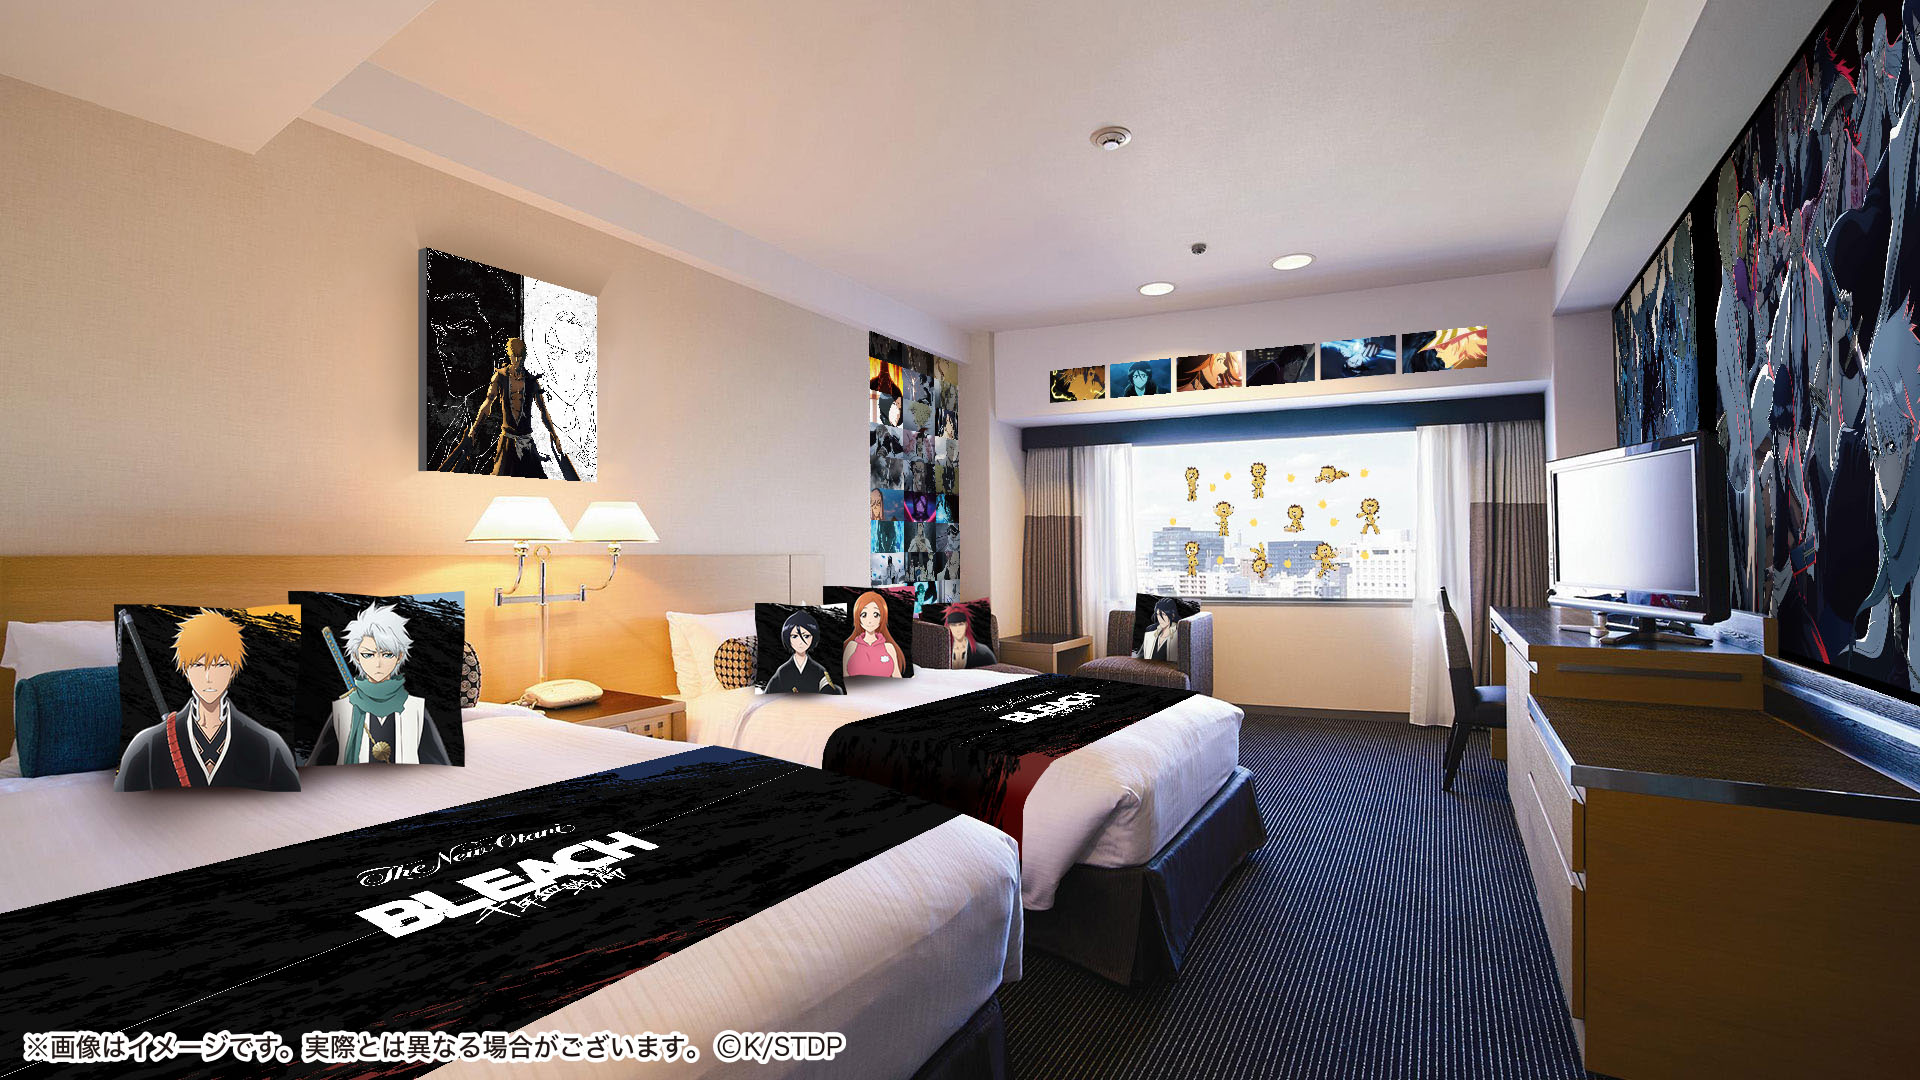 Committed: 10 Comic Book & Pop Art Themed Hotels